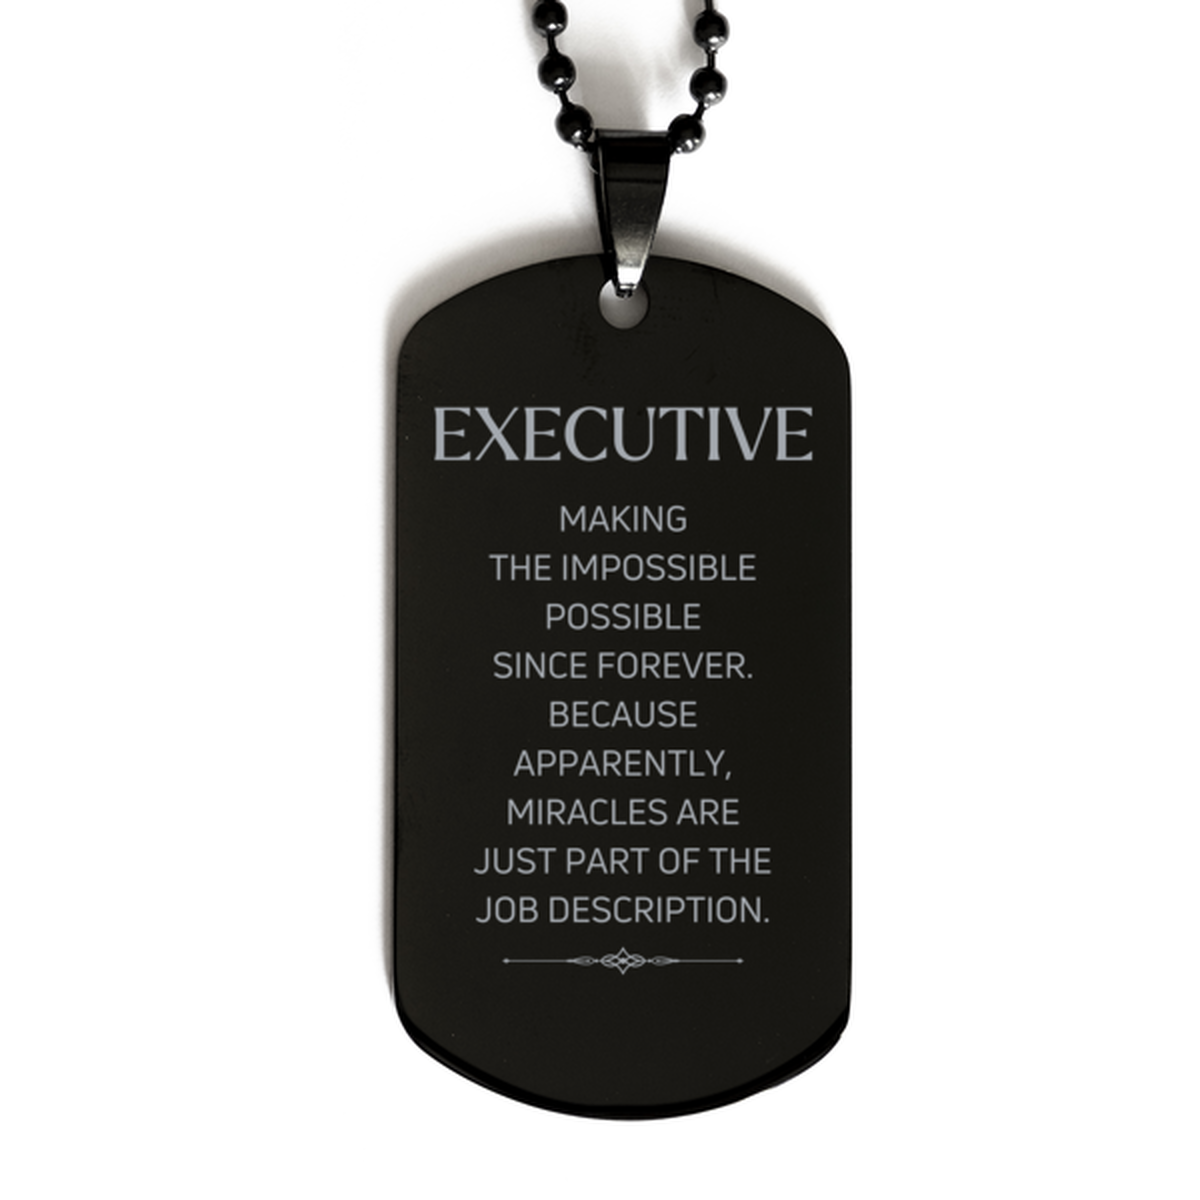 Funny Executive Gifts, Miracles are just part of the job description, Inspirational Birthday Black Dog Tag For Executive, Men, Women, Coworkers, Friends, Boss